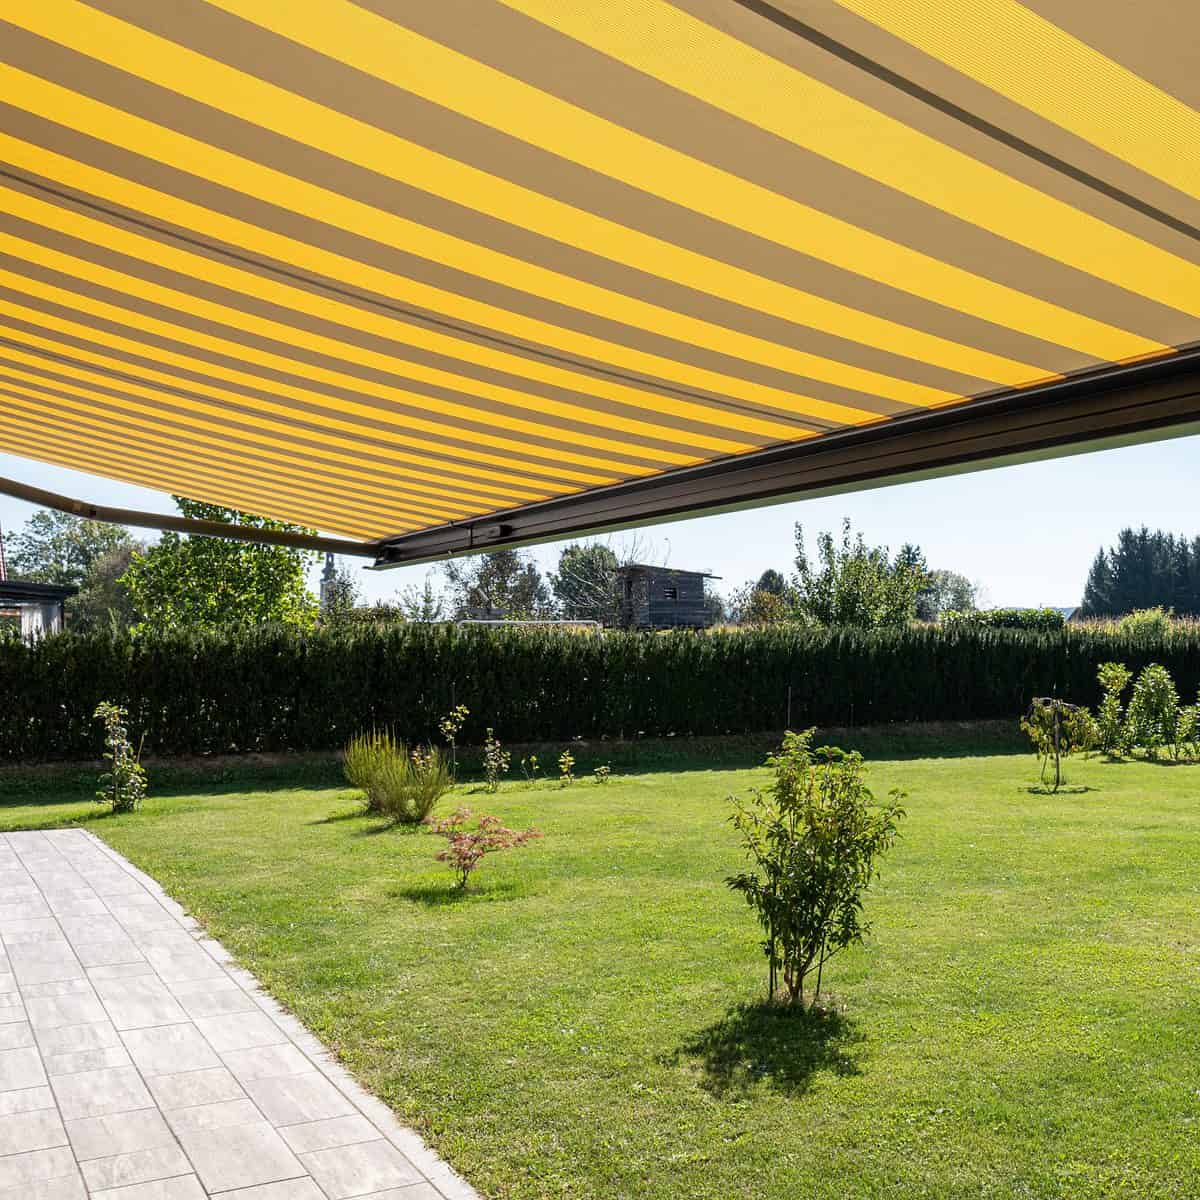 markilux MX-1 in a striped fabric covering a patio